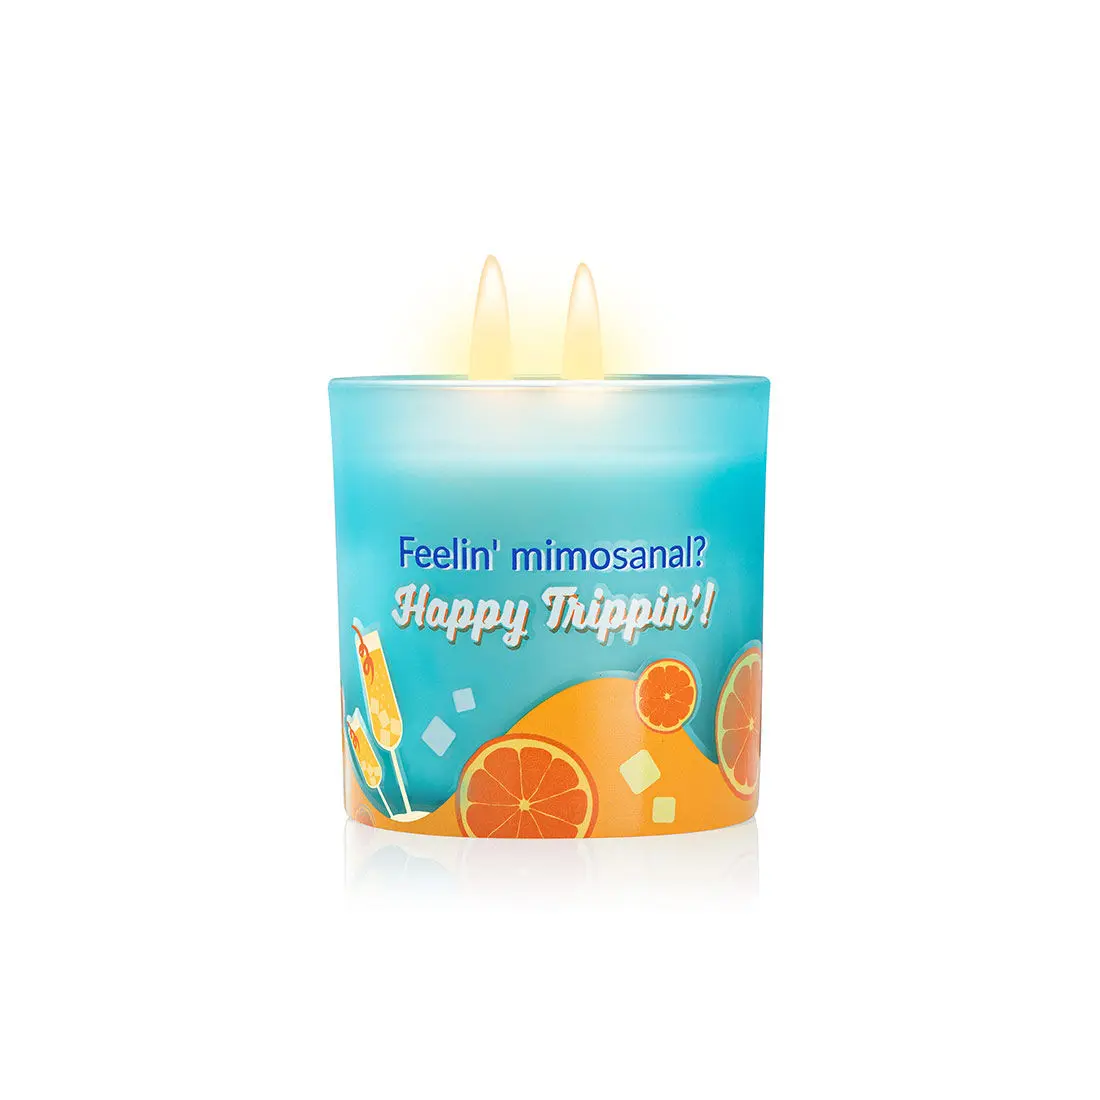 Plum BodyLovin’ Trippin’ Mimosas Scented Candle | Long-lasting Fragrance | Evenly Melting Wax